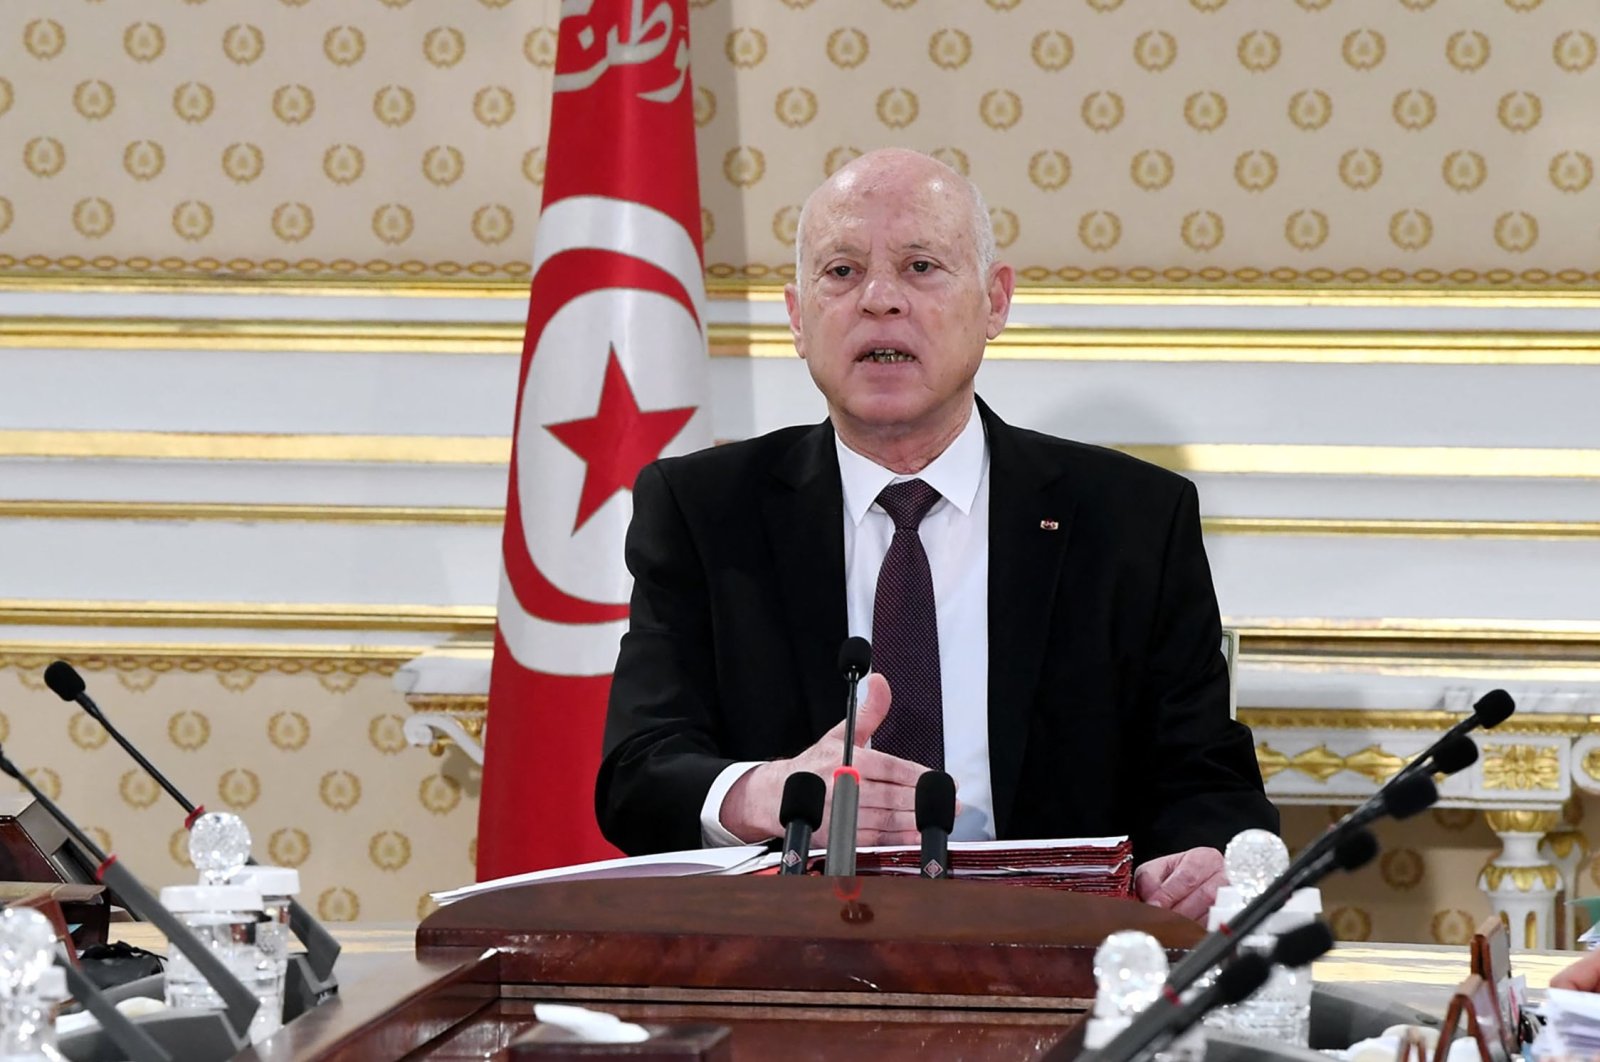 President Kais Saied attends a cabinet meeting in the capital Tunis, Tunisia, Dec. 13, 2021. (Photo by TUNISIAN PRESIDENCY / AFP)